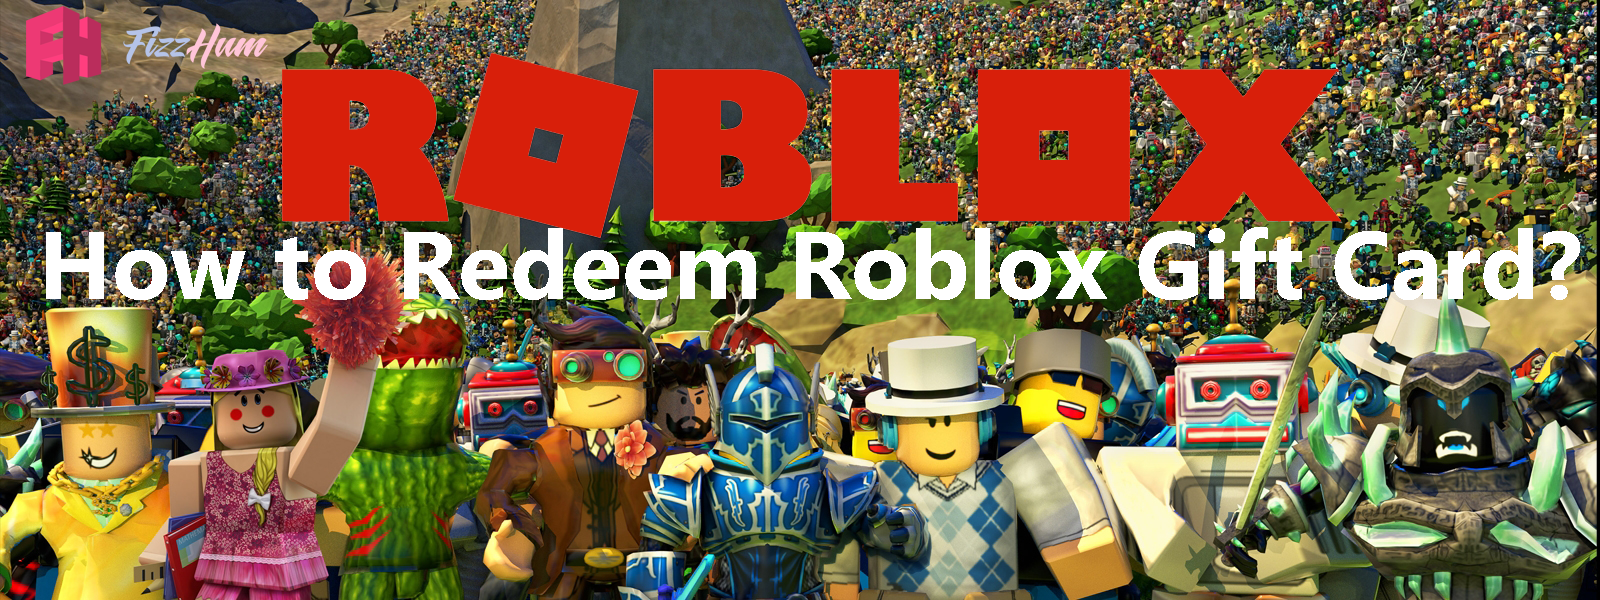 How To Redeem Roblox Gift Card Step By Step 2021 Fizzhum Com - pin code redeem roblox cards